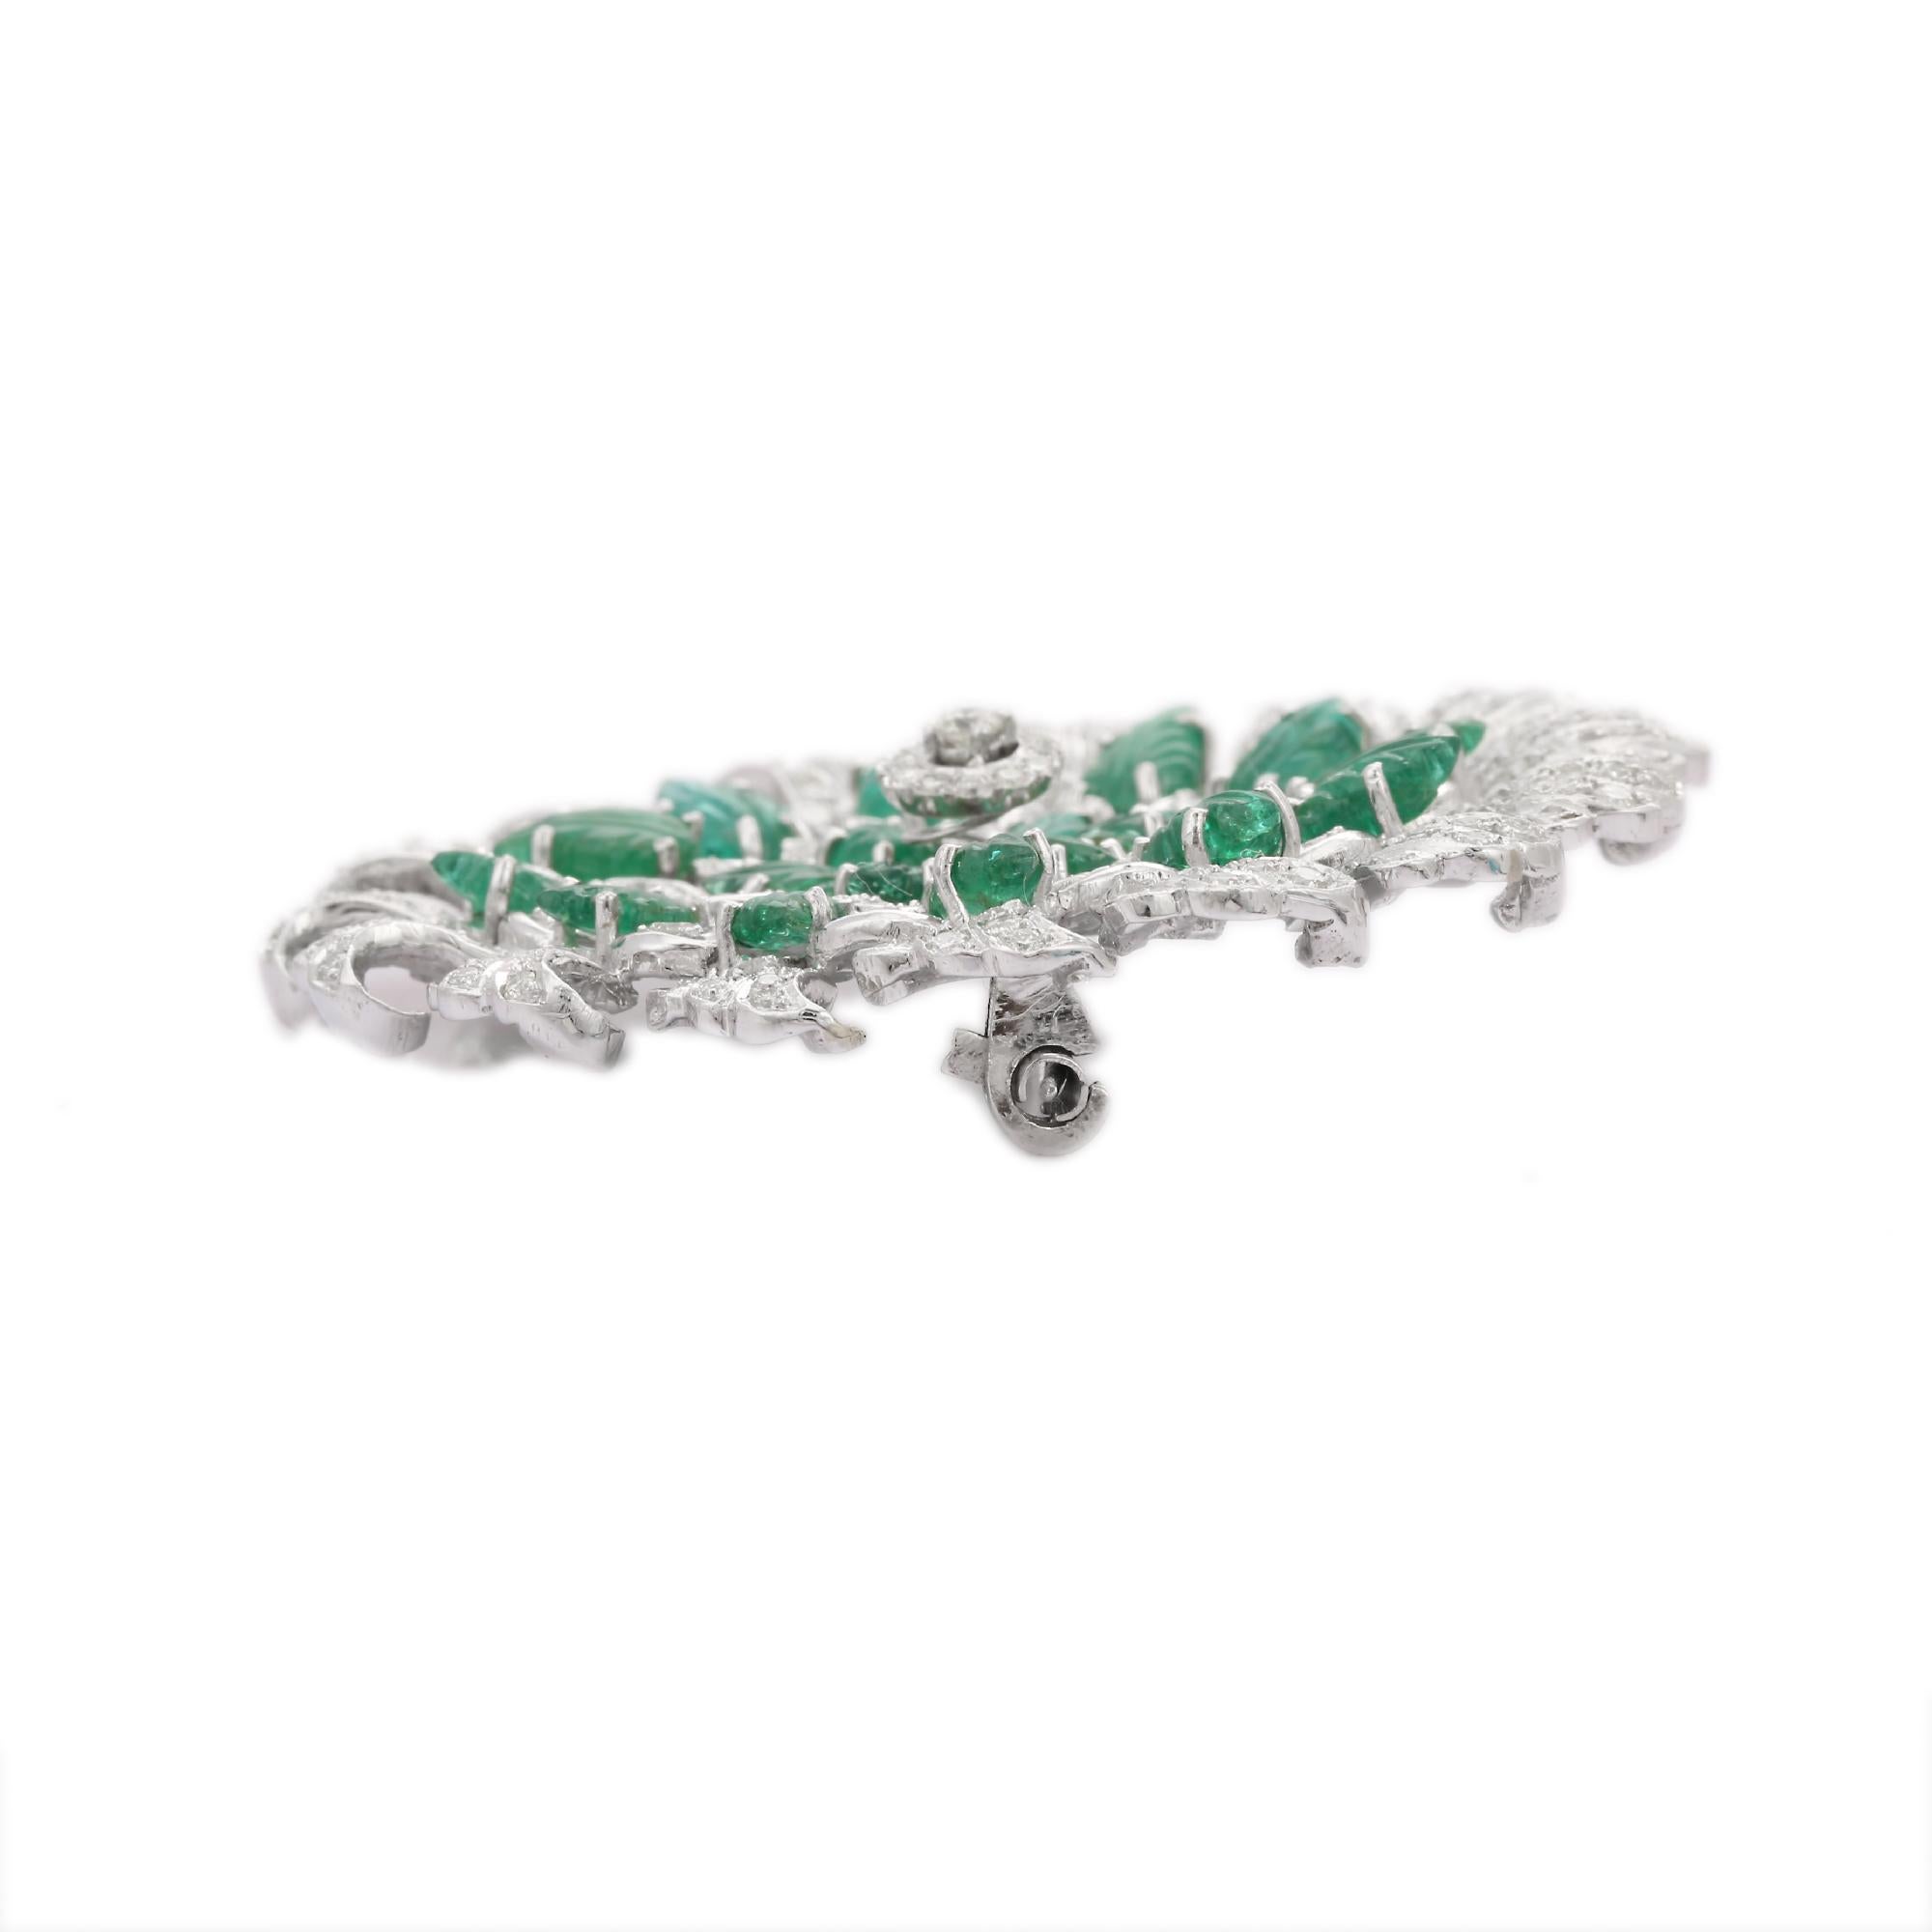 Mixed Cut Natural Emerald Diamond Big Flower Brooch 18k Solid White Gold, Fine Jewelry For Sale